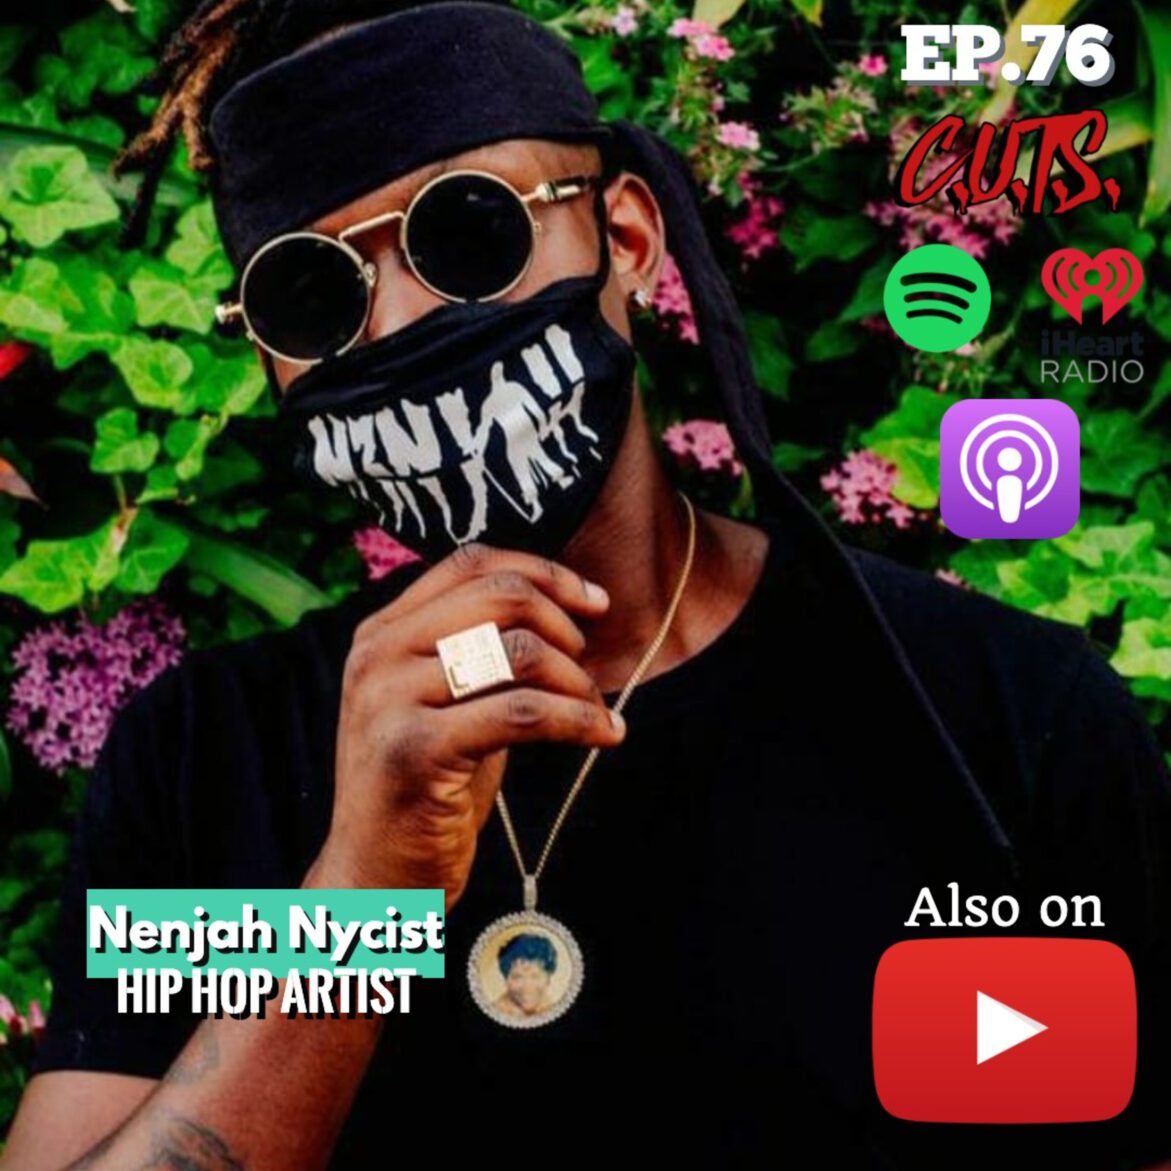 Black Podcasting - Season 4, Episode 76: How can one be the "NYCIST" Ninja? - Nenjah Nycist Interview